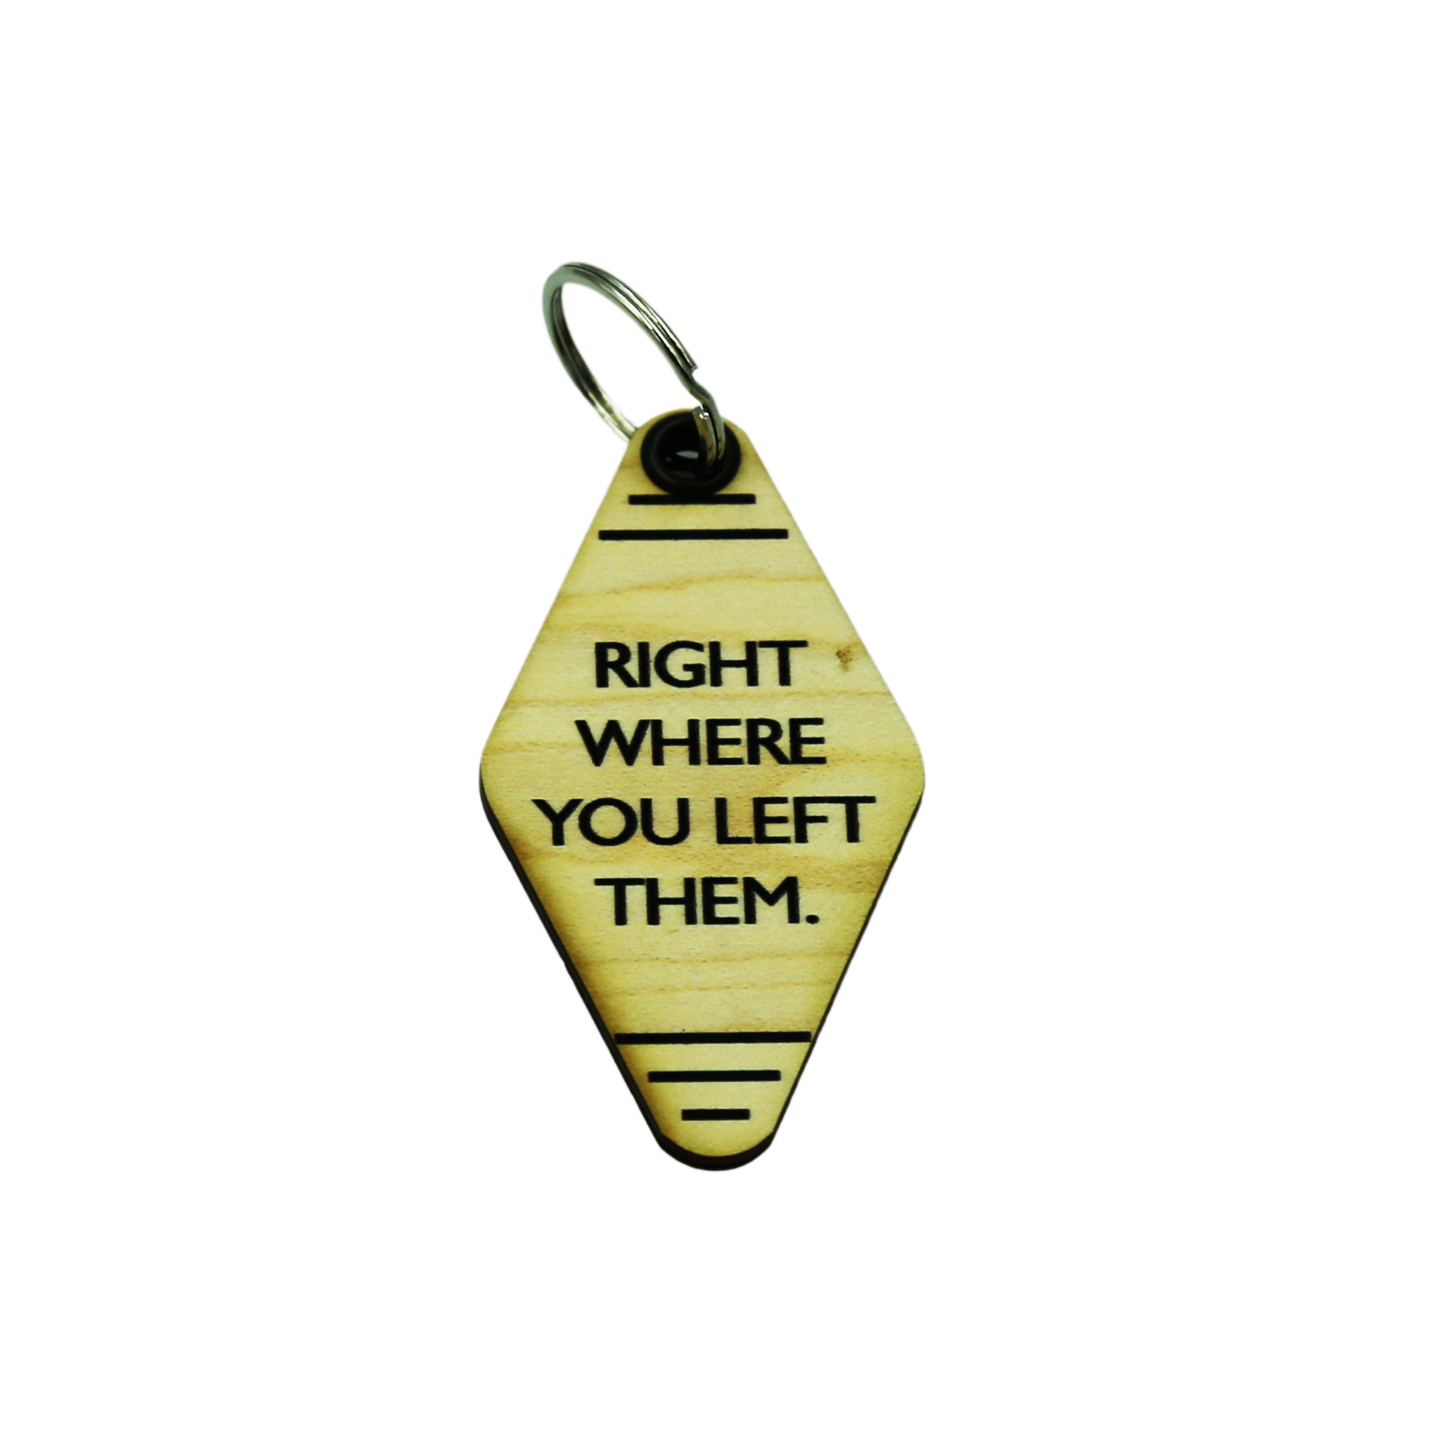 Driftless Studios - Funny Keychains - Right Where You Left Them